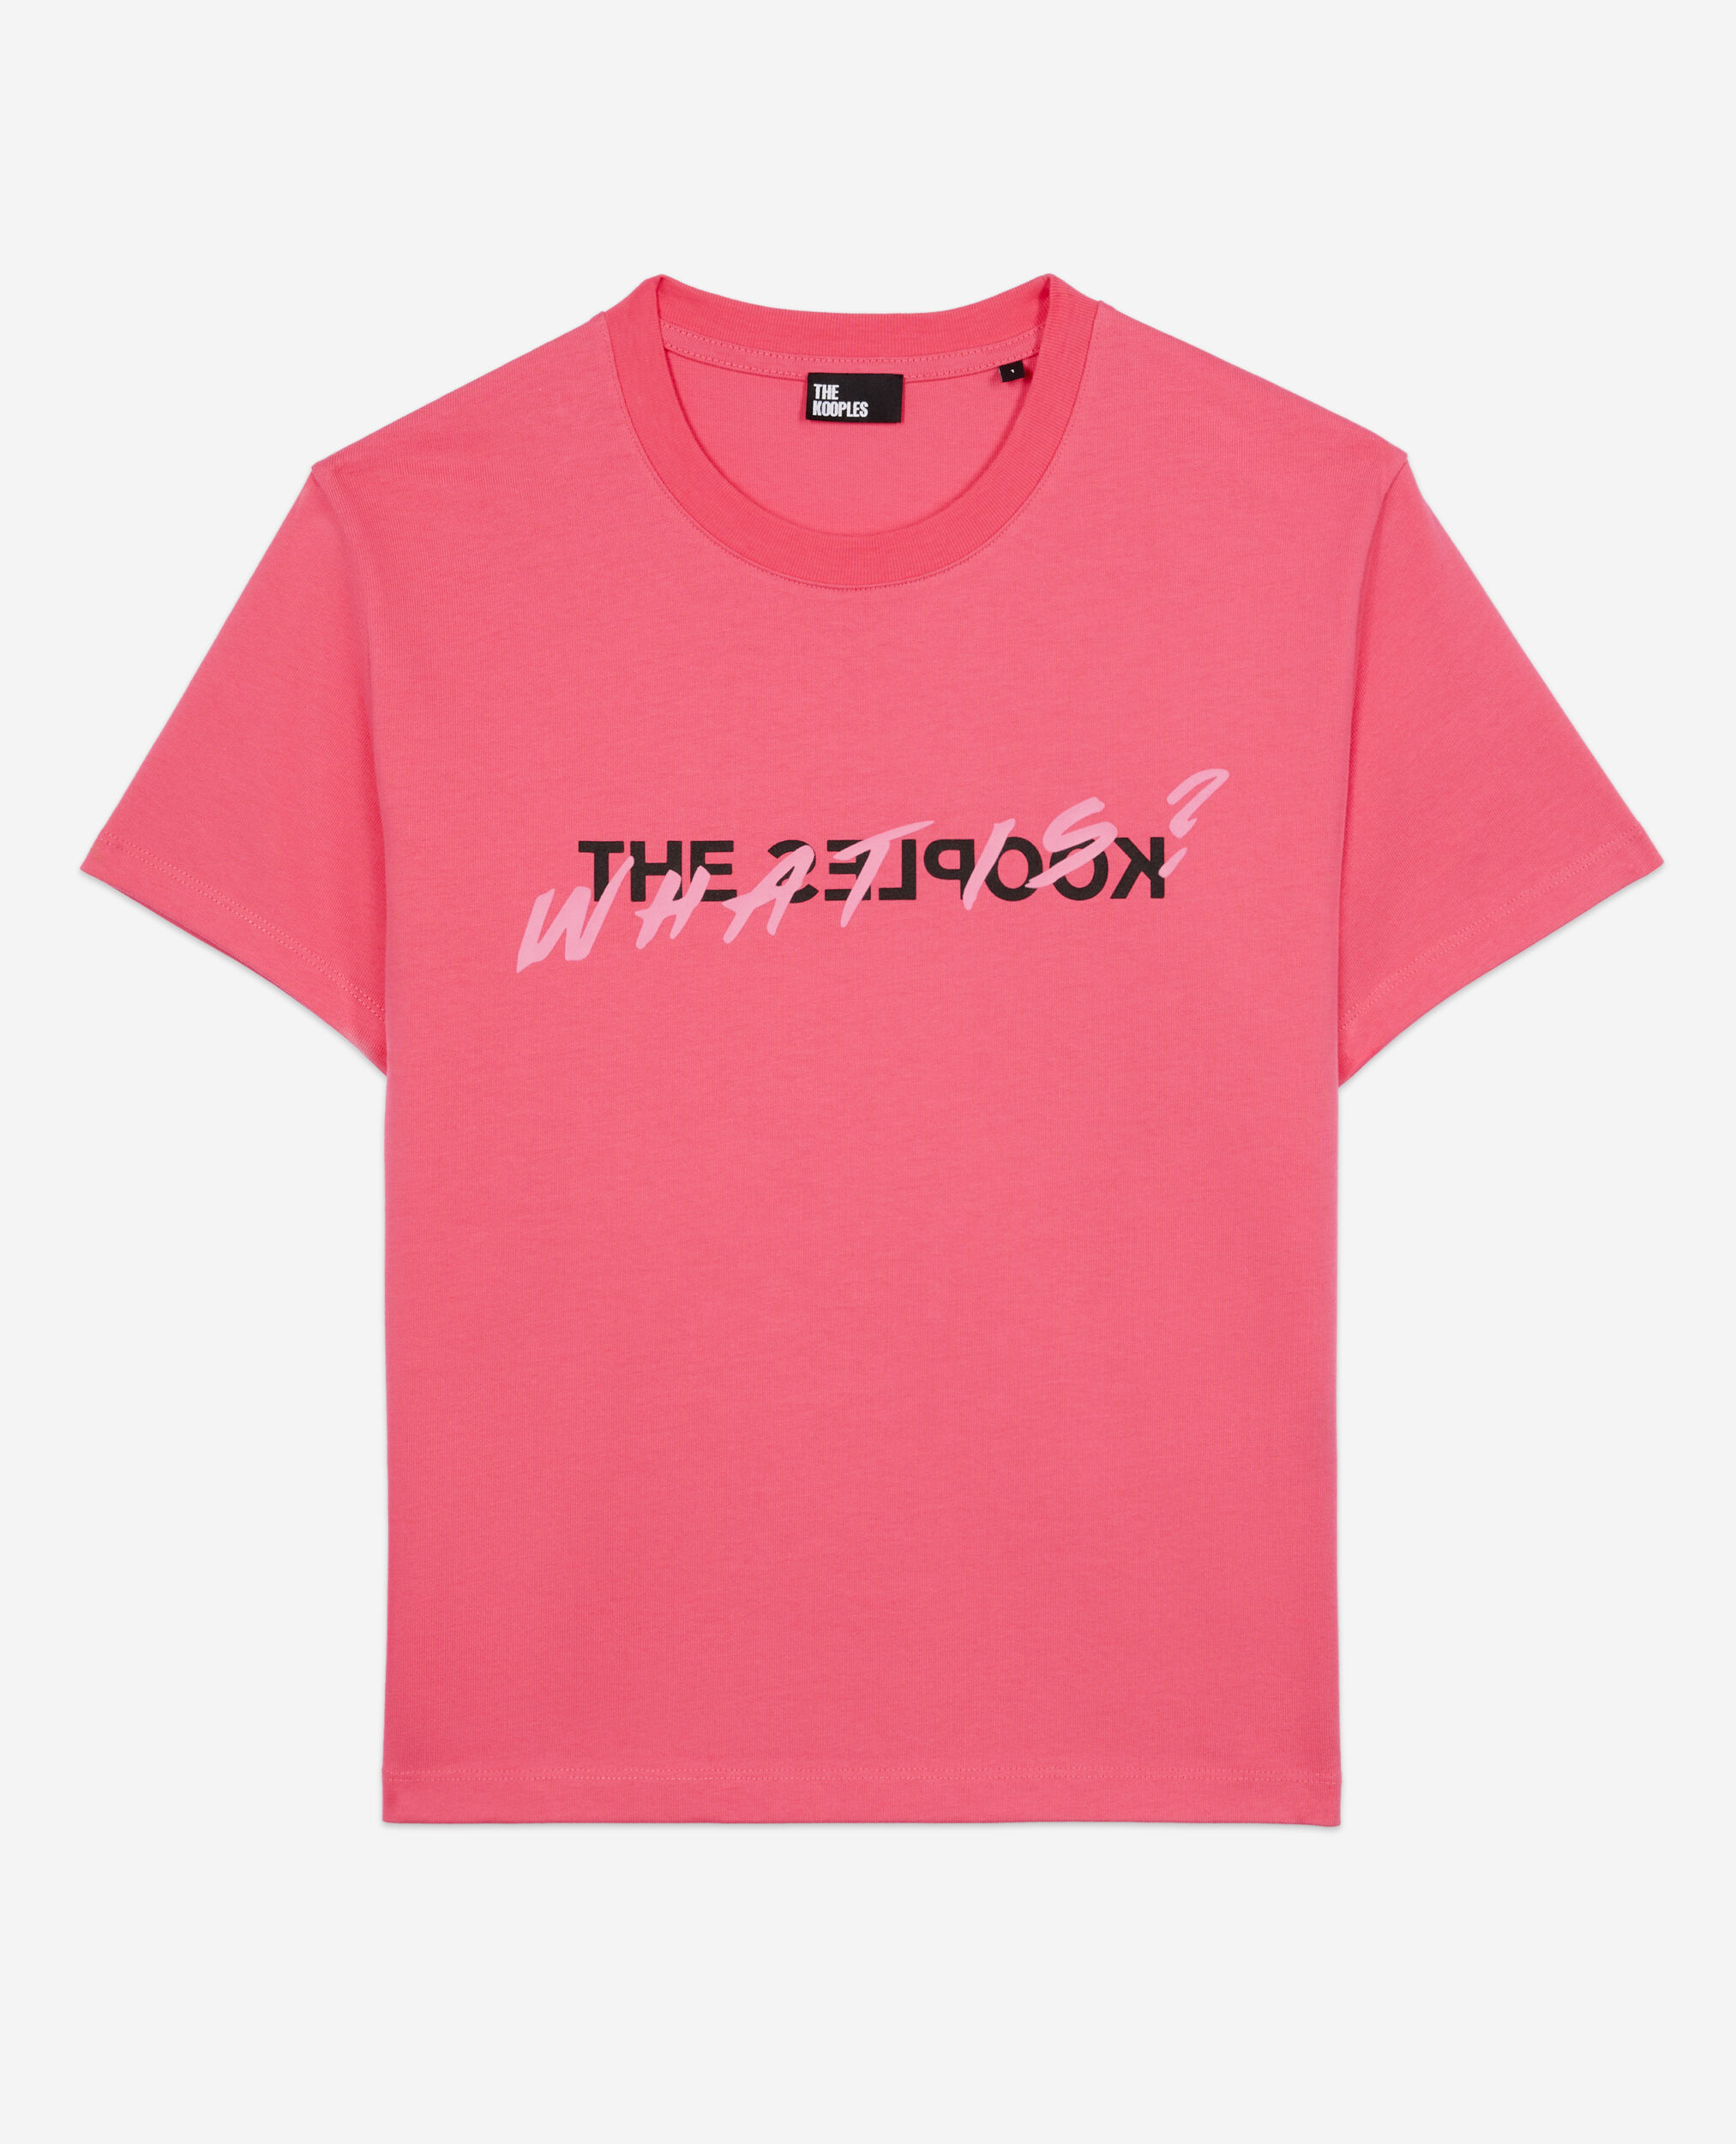 T-shirt "Was ist" fuchsia, RETRO PINK, hi-res image number null